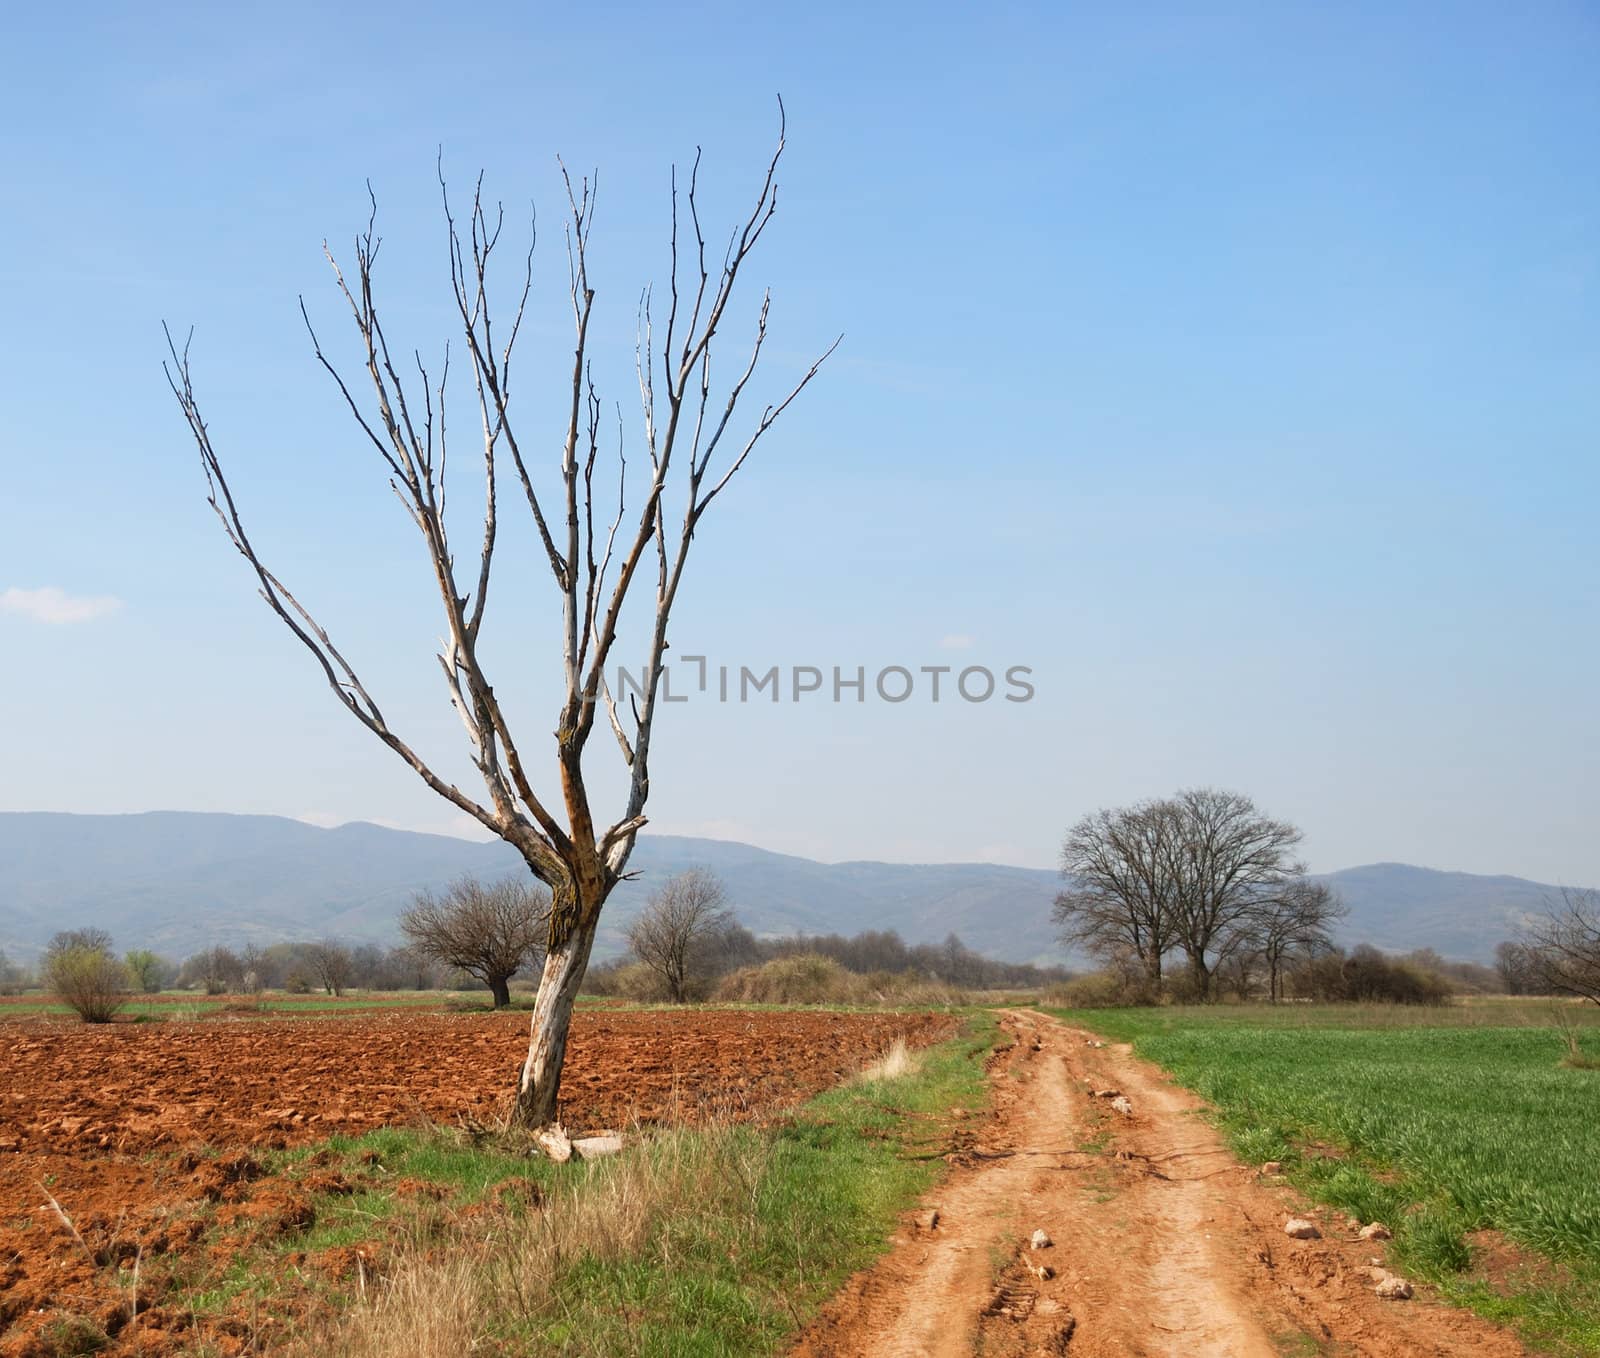 Dry tree by the road in early spring with young wheat and plowed ground in background.